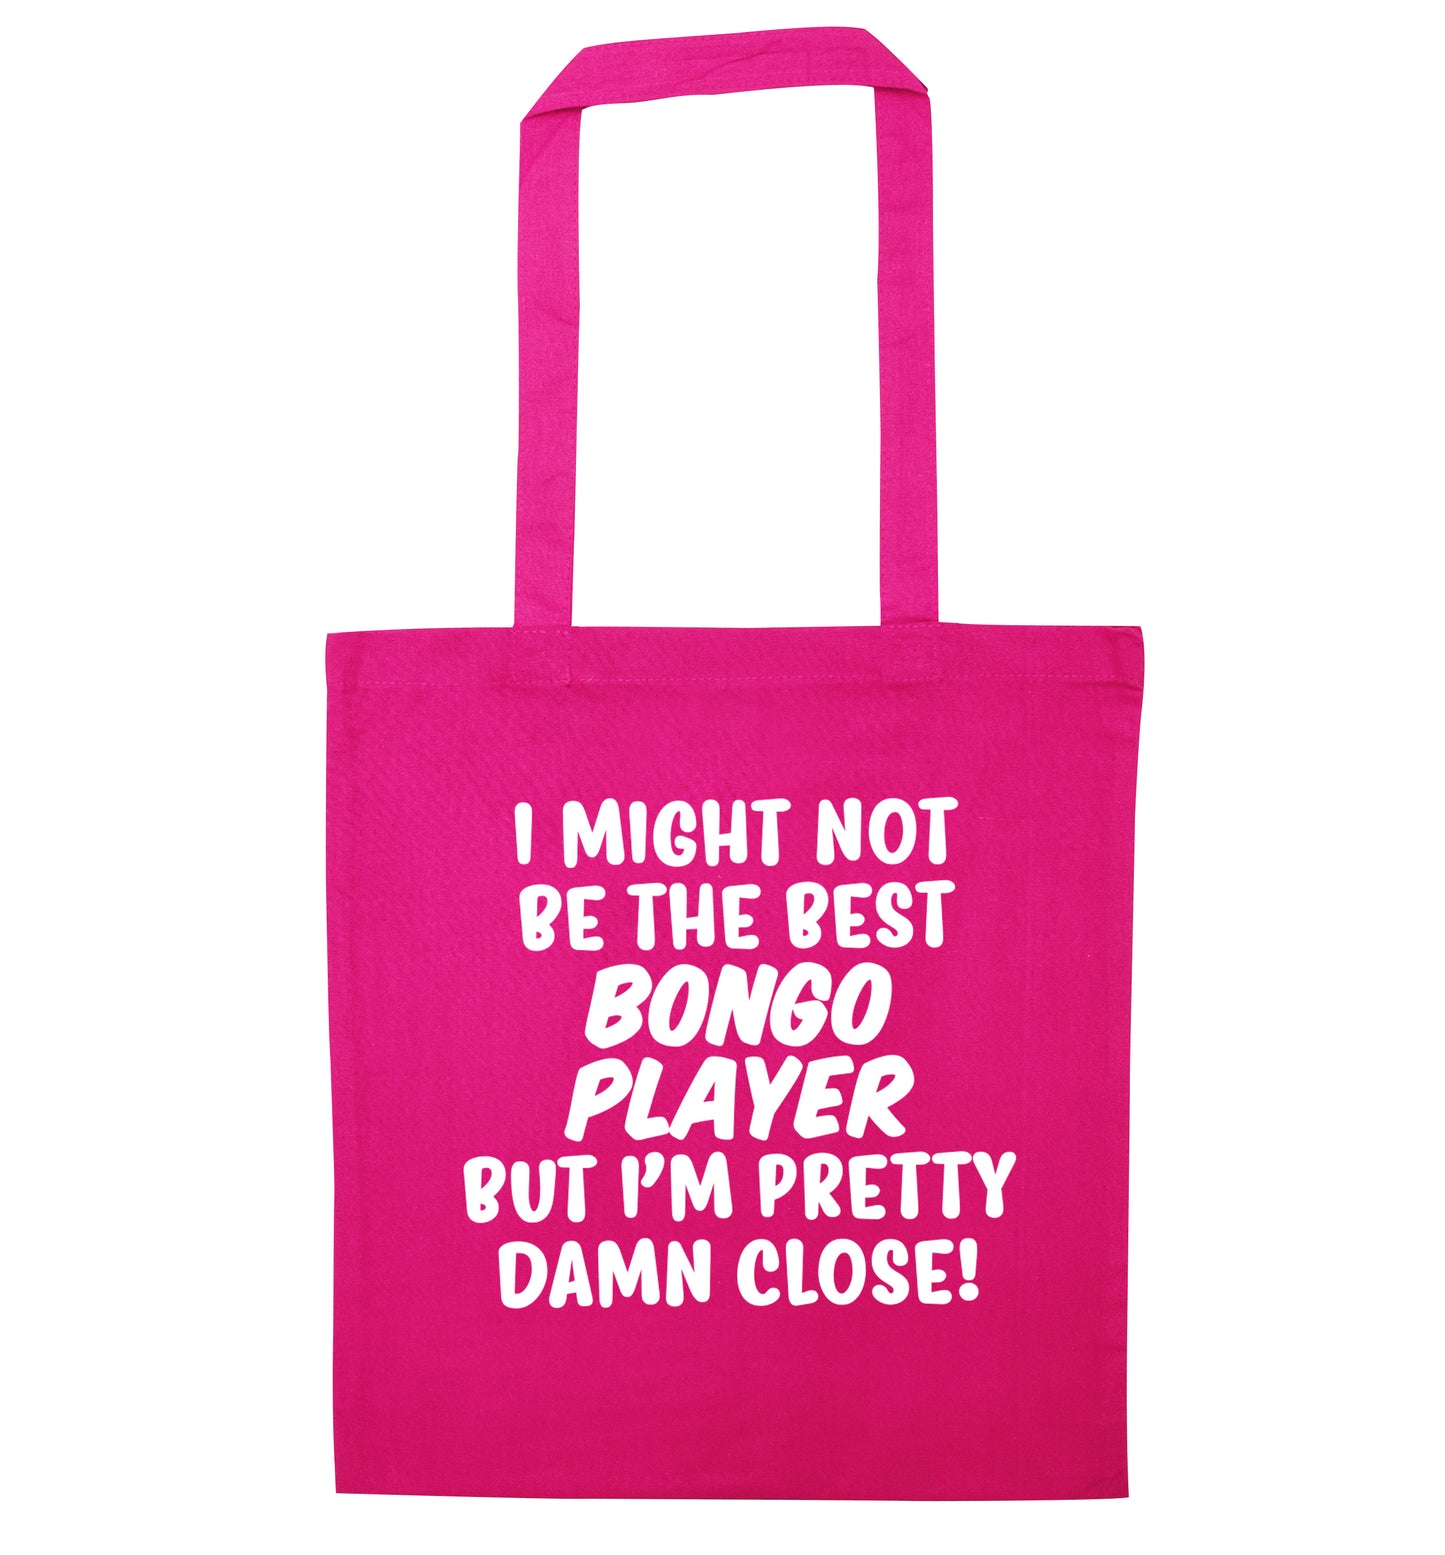 I might not be the best bongo player but I'm pretty close! pink tote bag